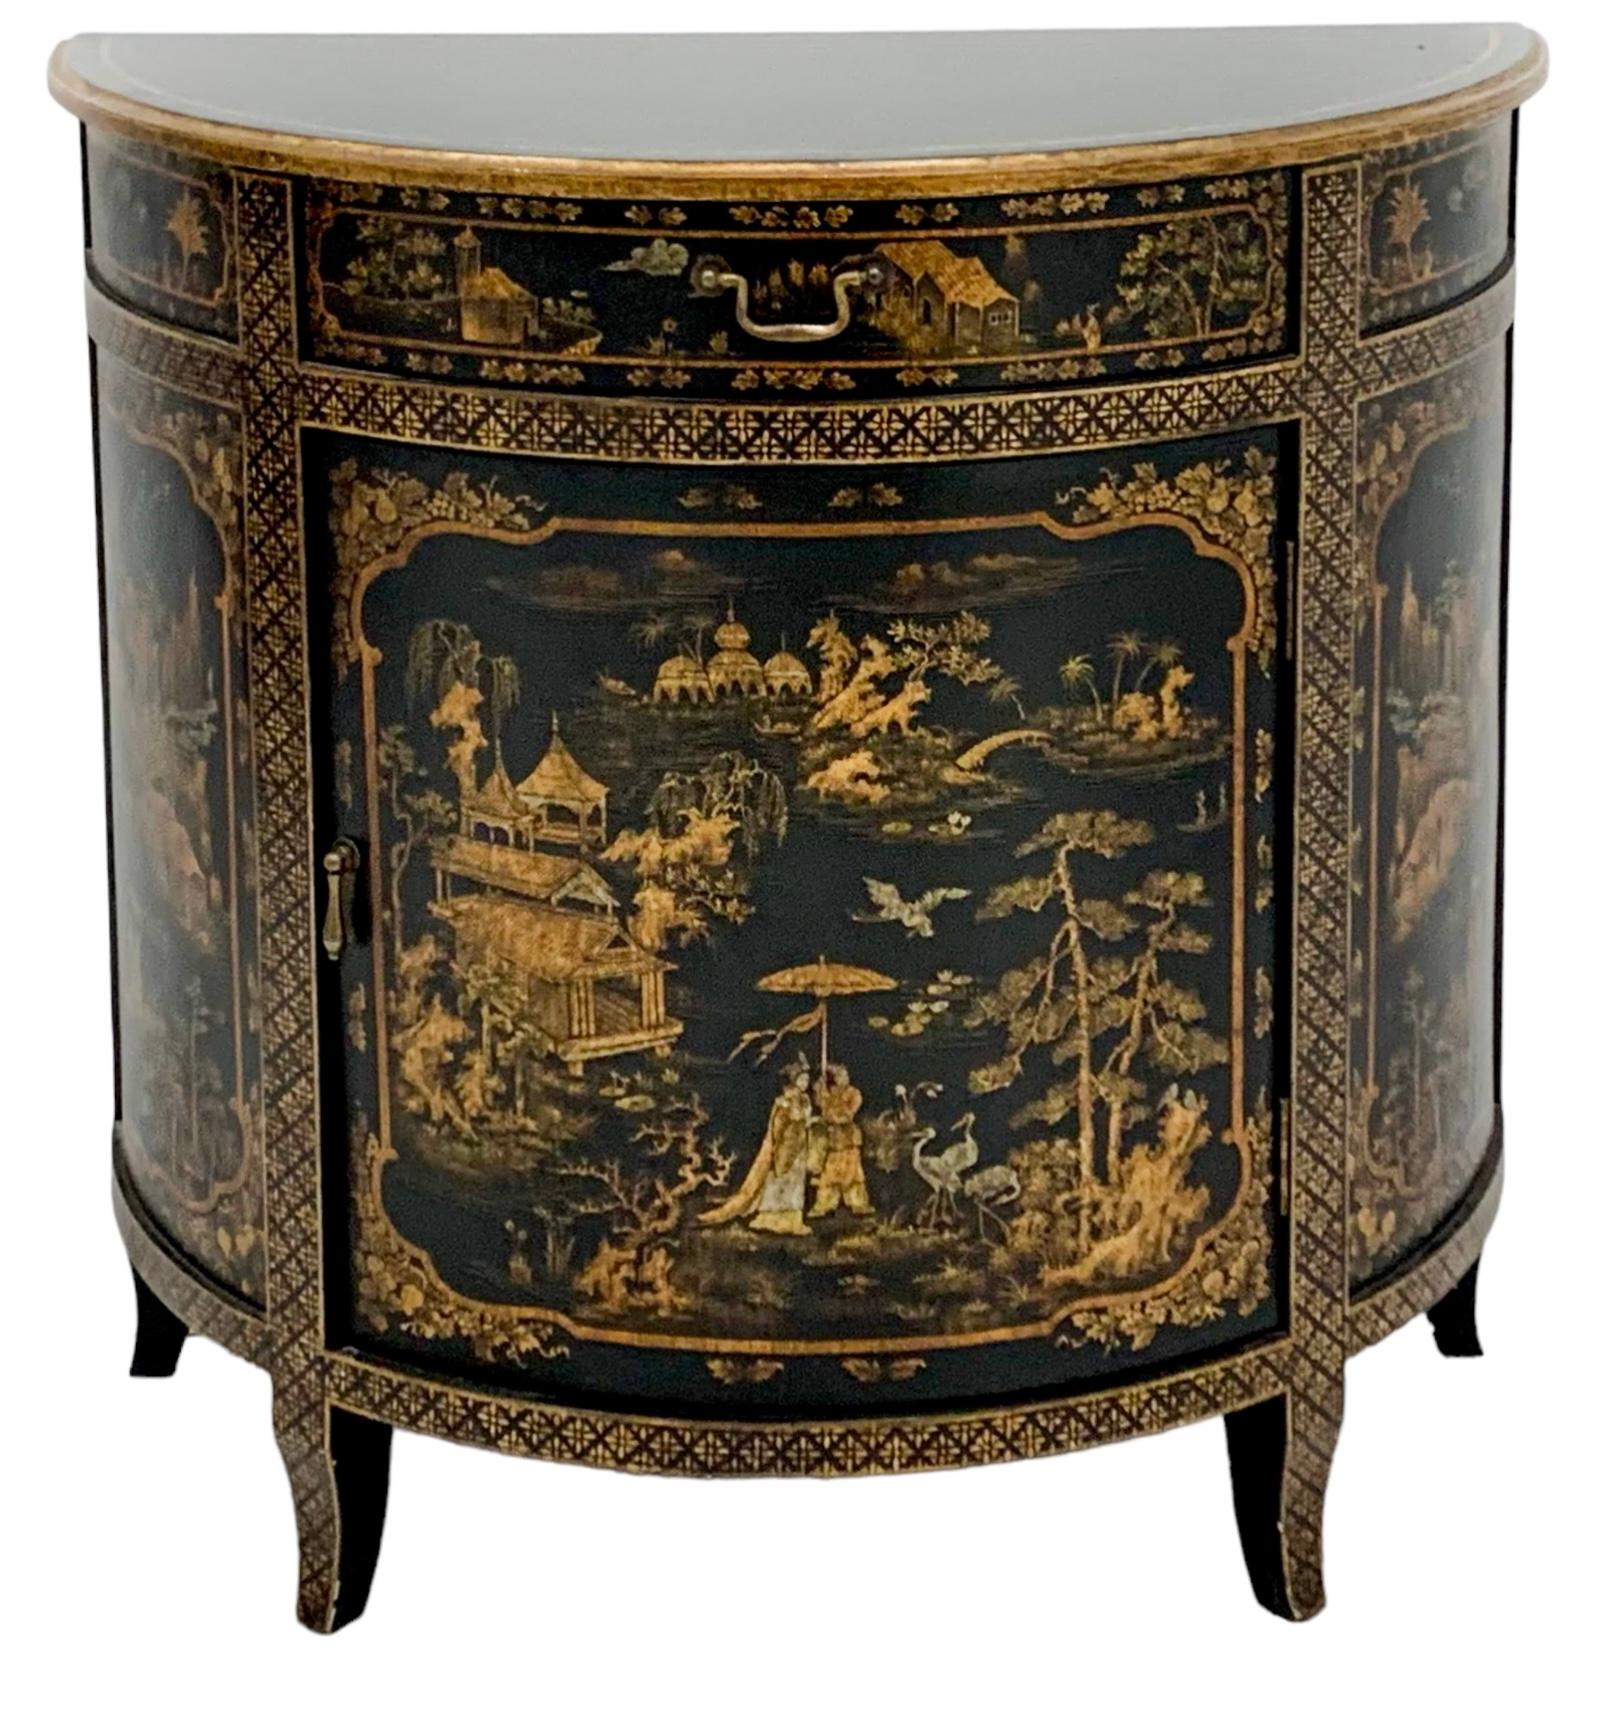 This is a late 20th century Italian regency style chinoiserie demilune form cabinet by Decorative Crafts. It opens to a single shelf. The chinoiserie is particularly detailed with pastoral scenes. It is marked.